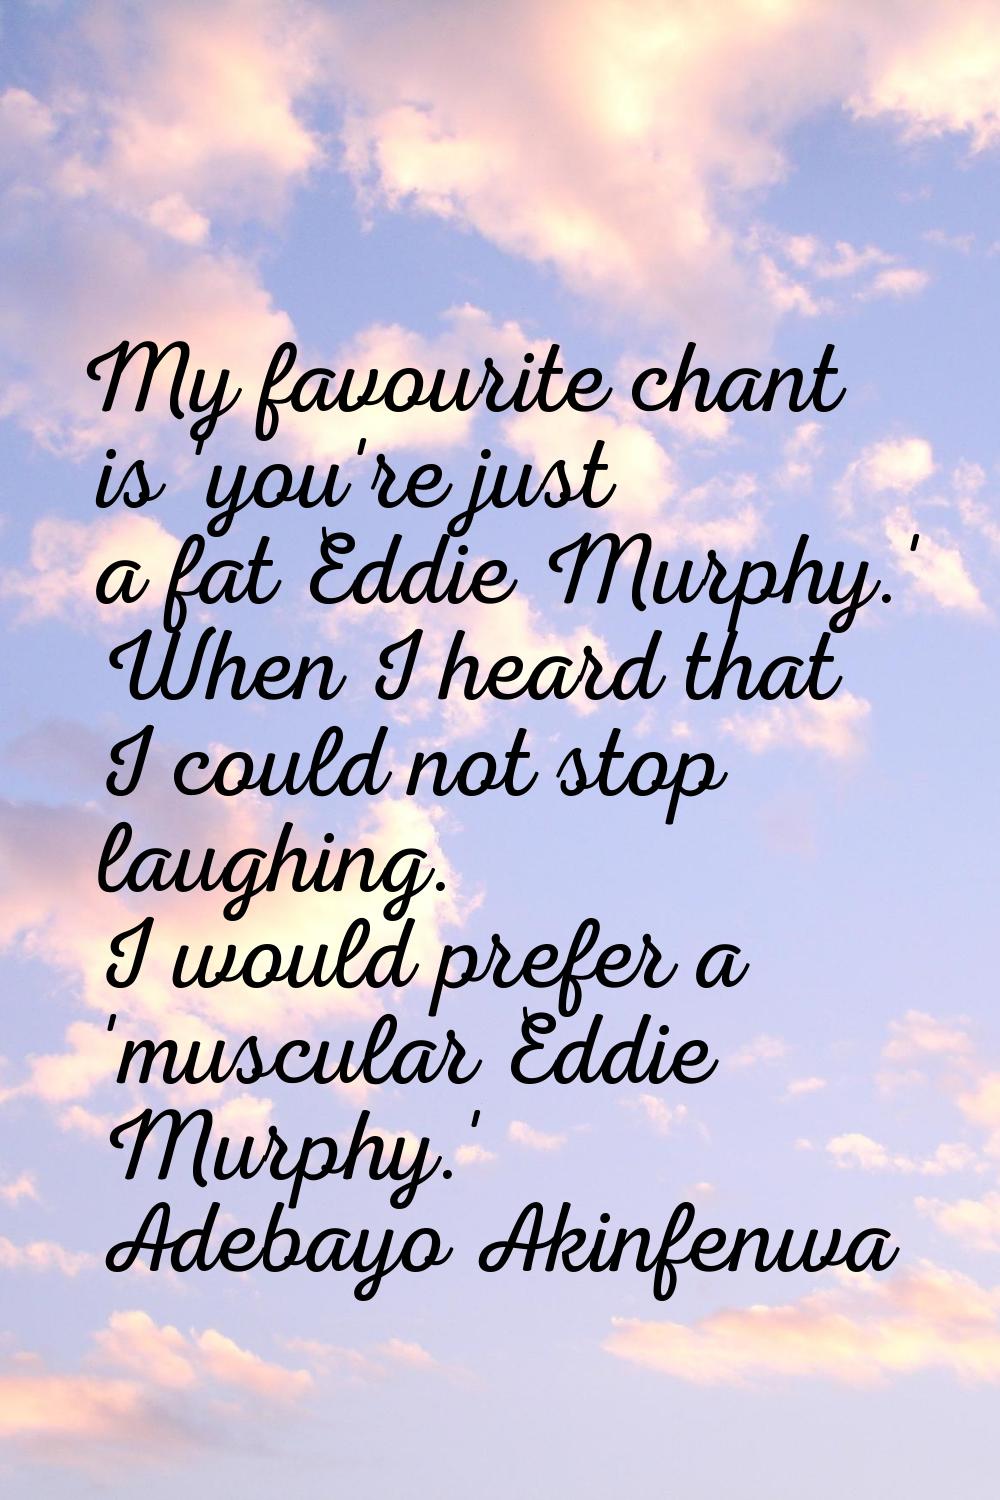 My favourite chant is 'you're just a fat Eddie Murphy.' When I heard that I could not stop laughing